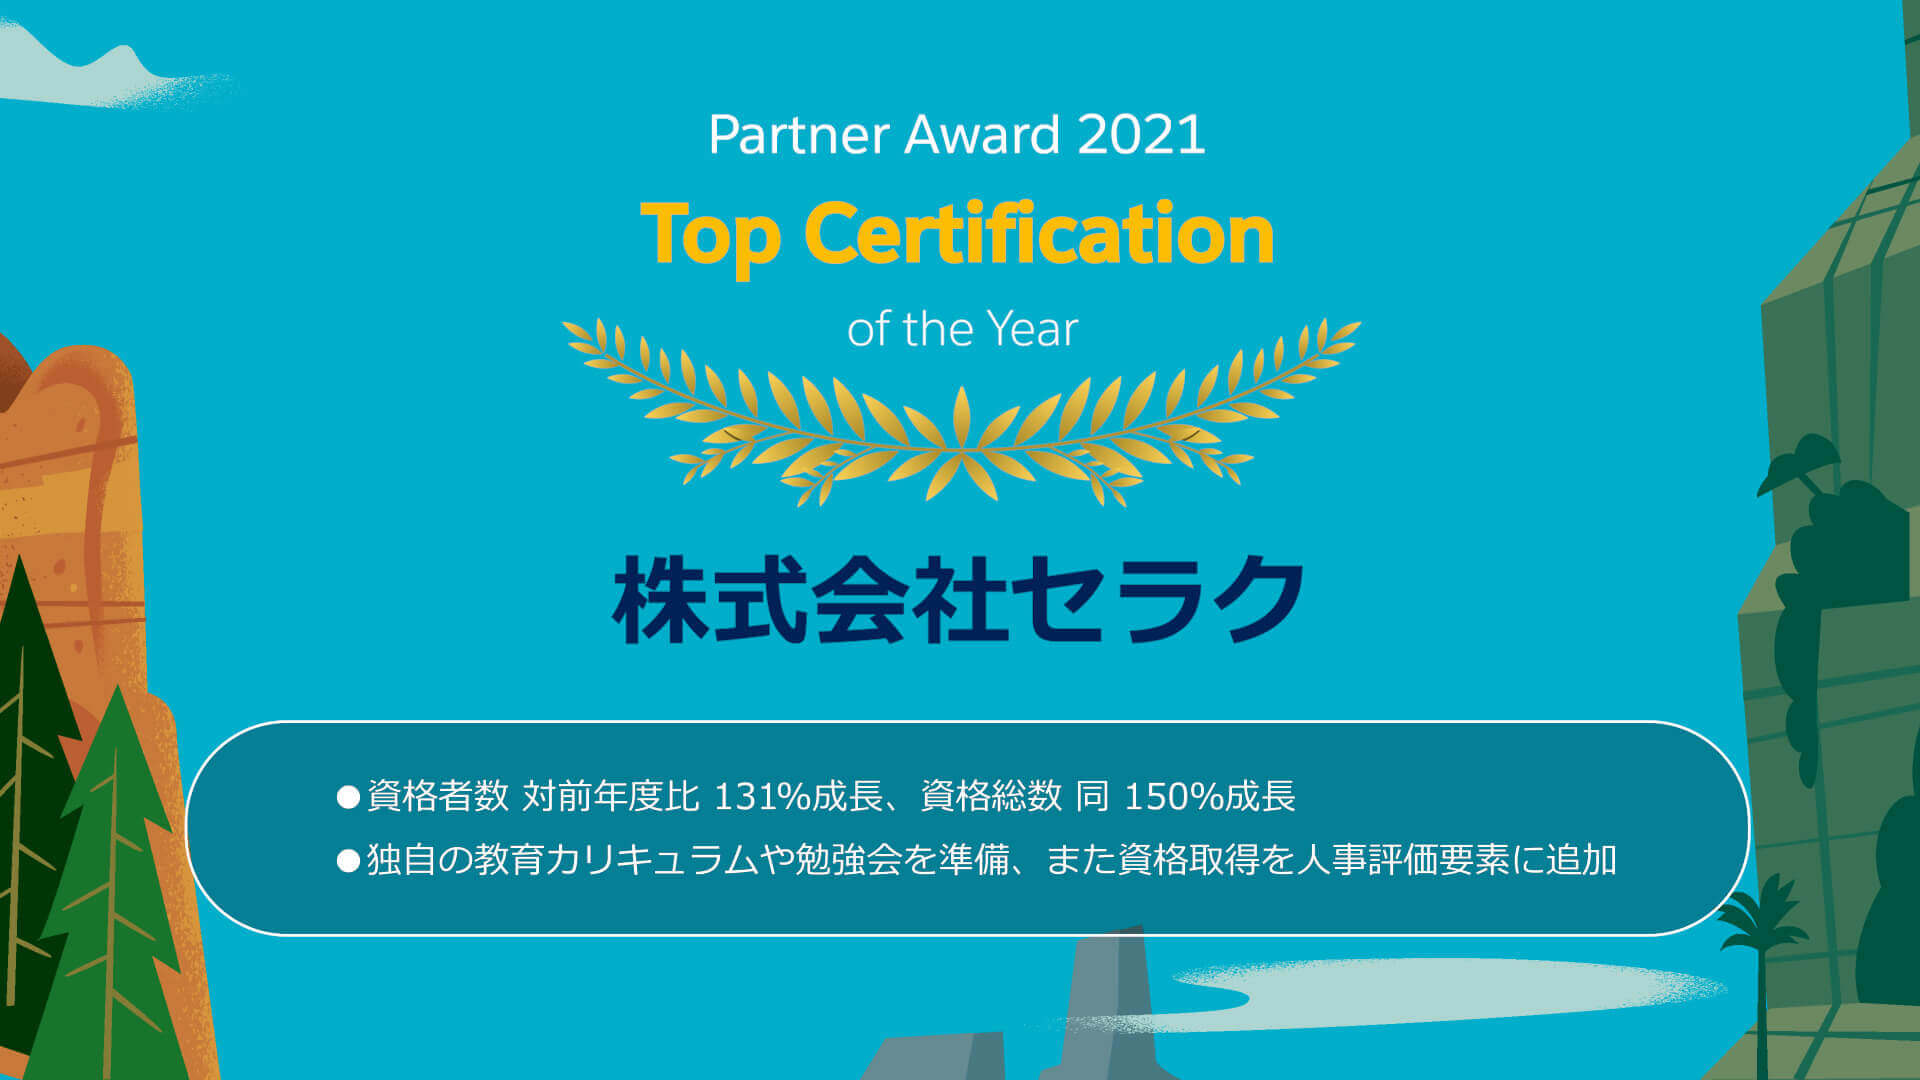 Partner Award 2021 TOP Certification of the Year 株式会社セラク